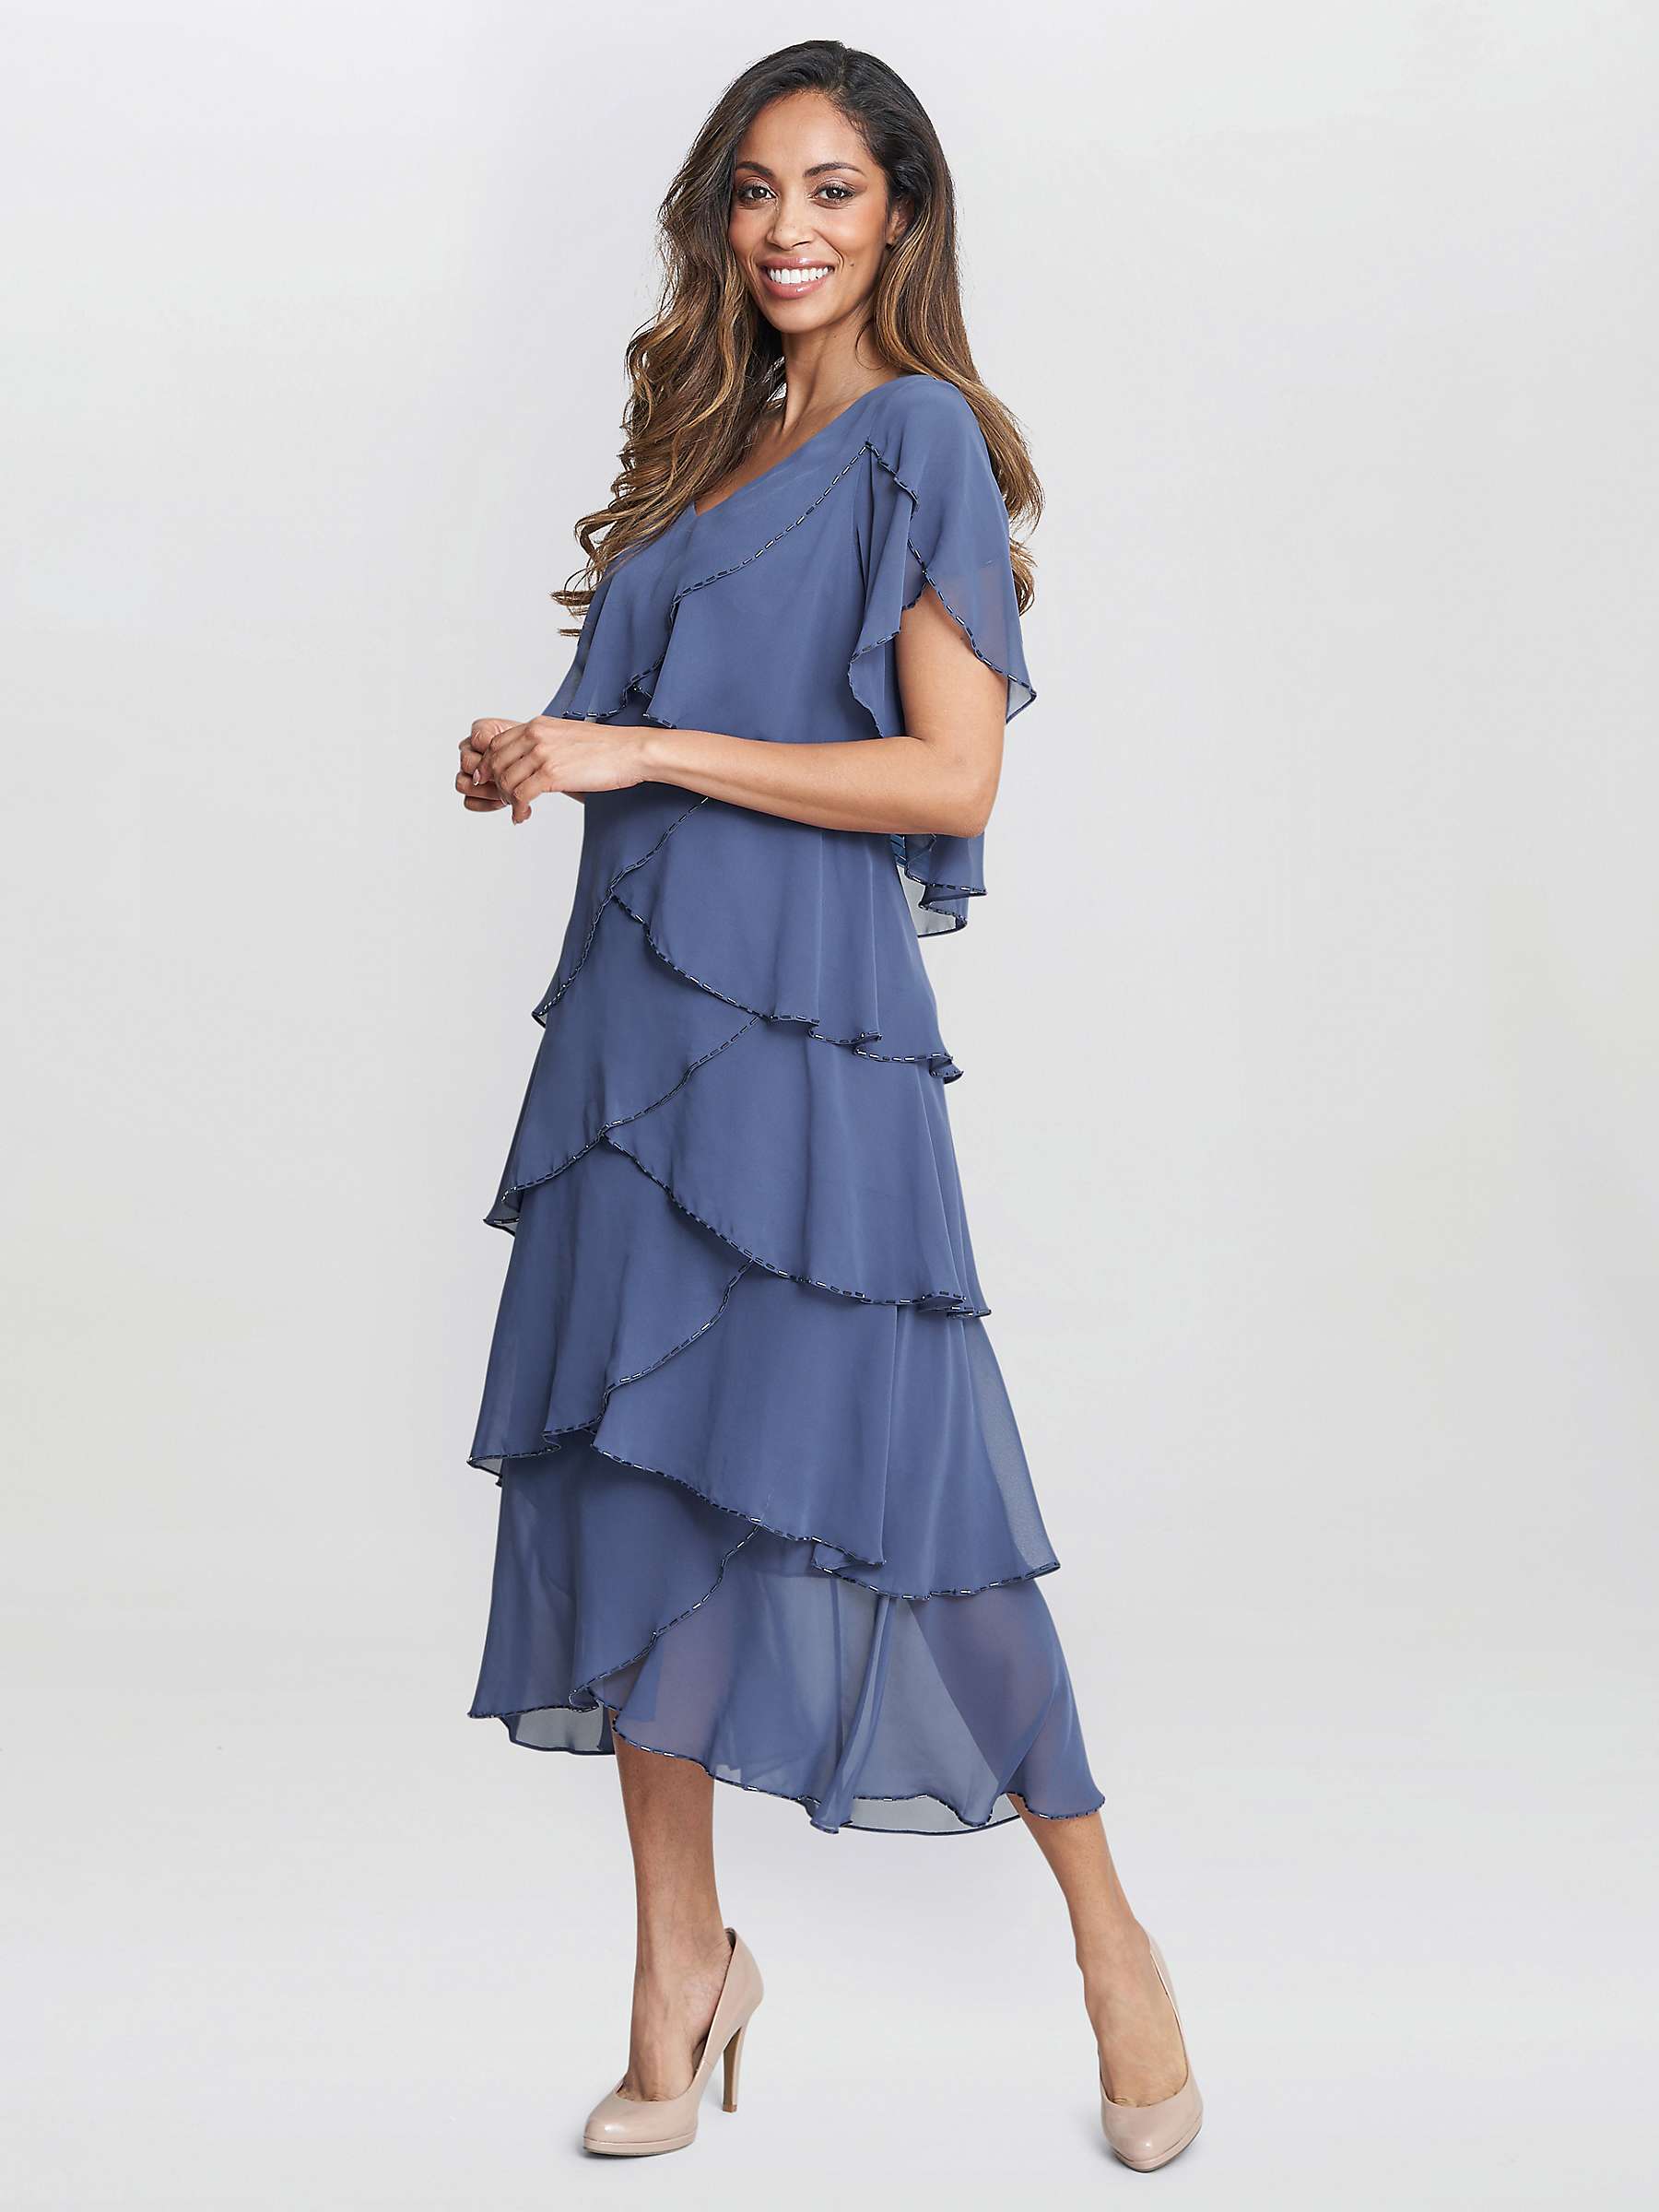 Buy Gina Bacconi Fleur V Neck With Bugle Beads Tier Midi Dress, Wedgewood Online at johnlewis.com